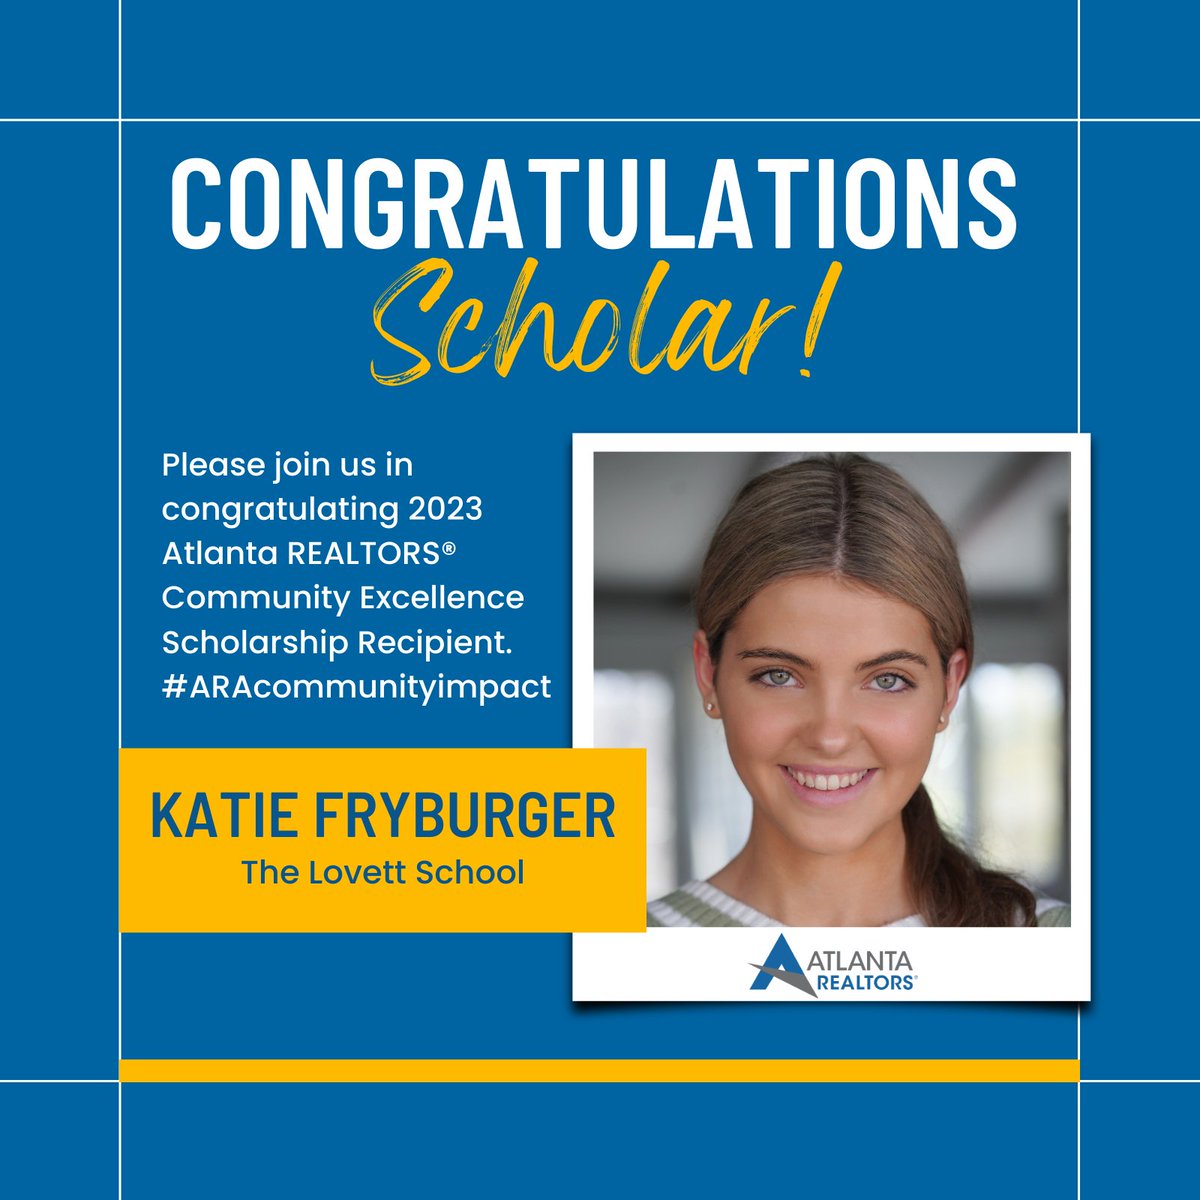 Pleased to announce that @katiefryburger has been awarded a 2023 Community Excellence Scholarship by the Impact Foundation Board of Trustees of the @AtlantaREALTORS very thankful as she transitions to @TheLovettSchool to @universityofga this fall #ARAcommunityimpact